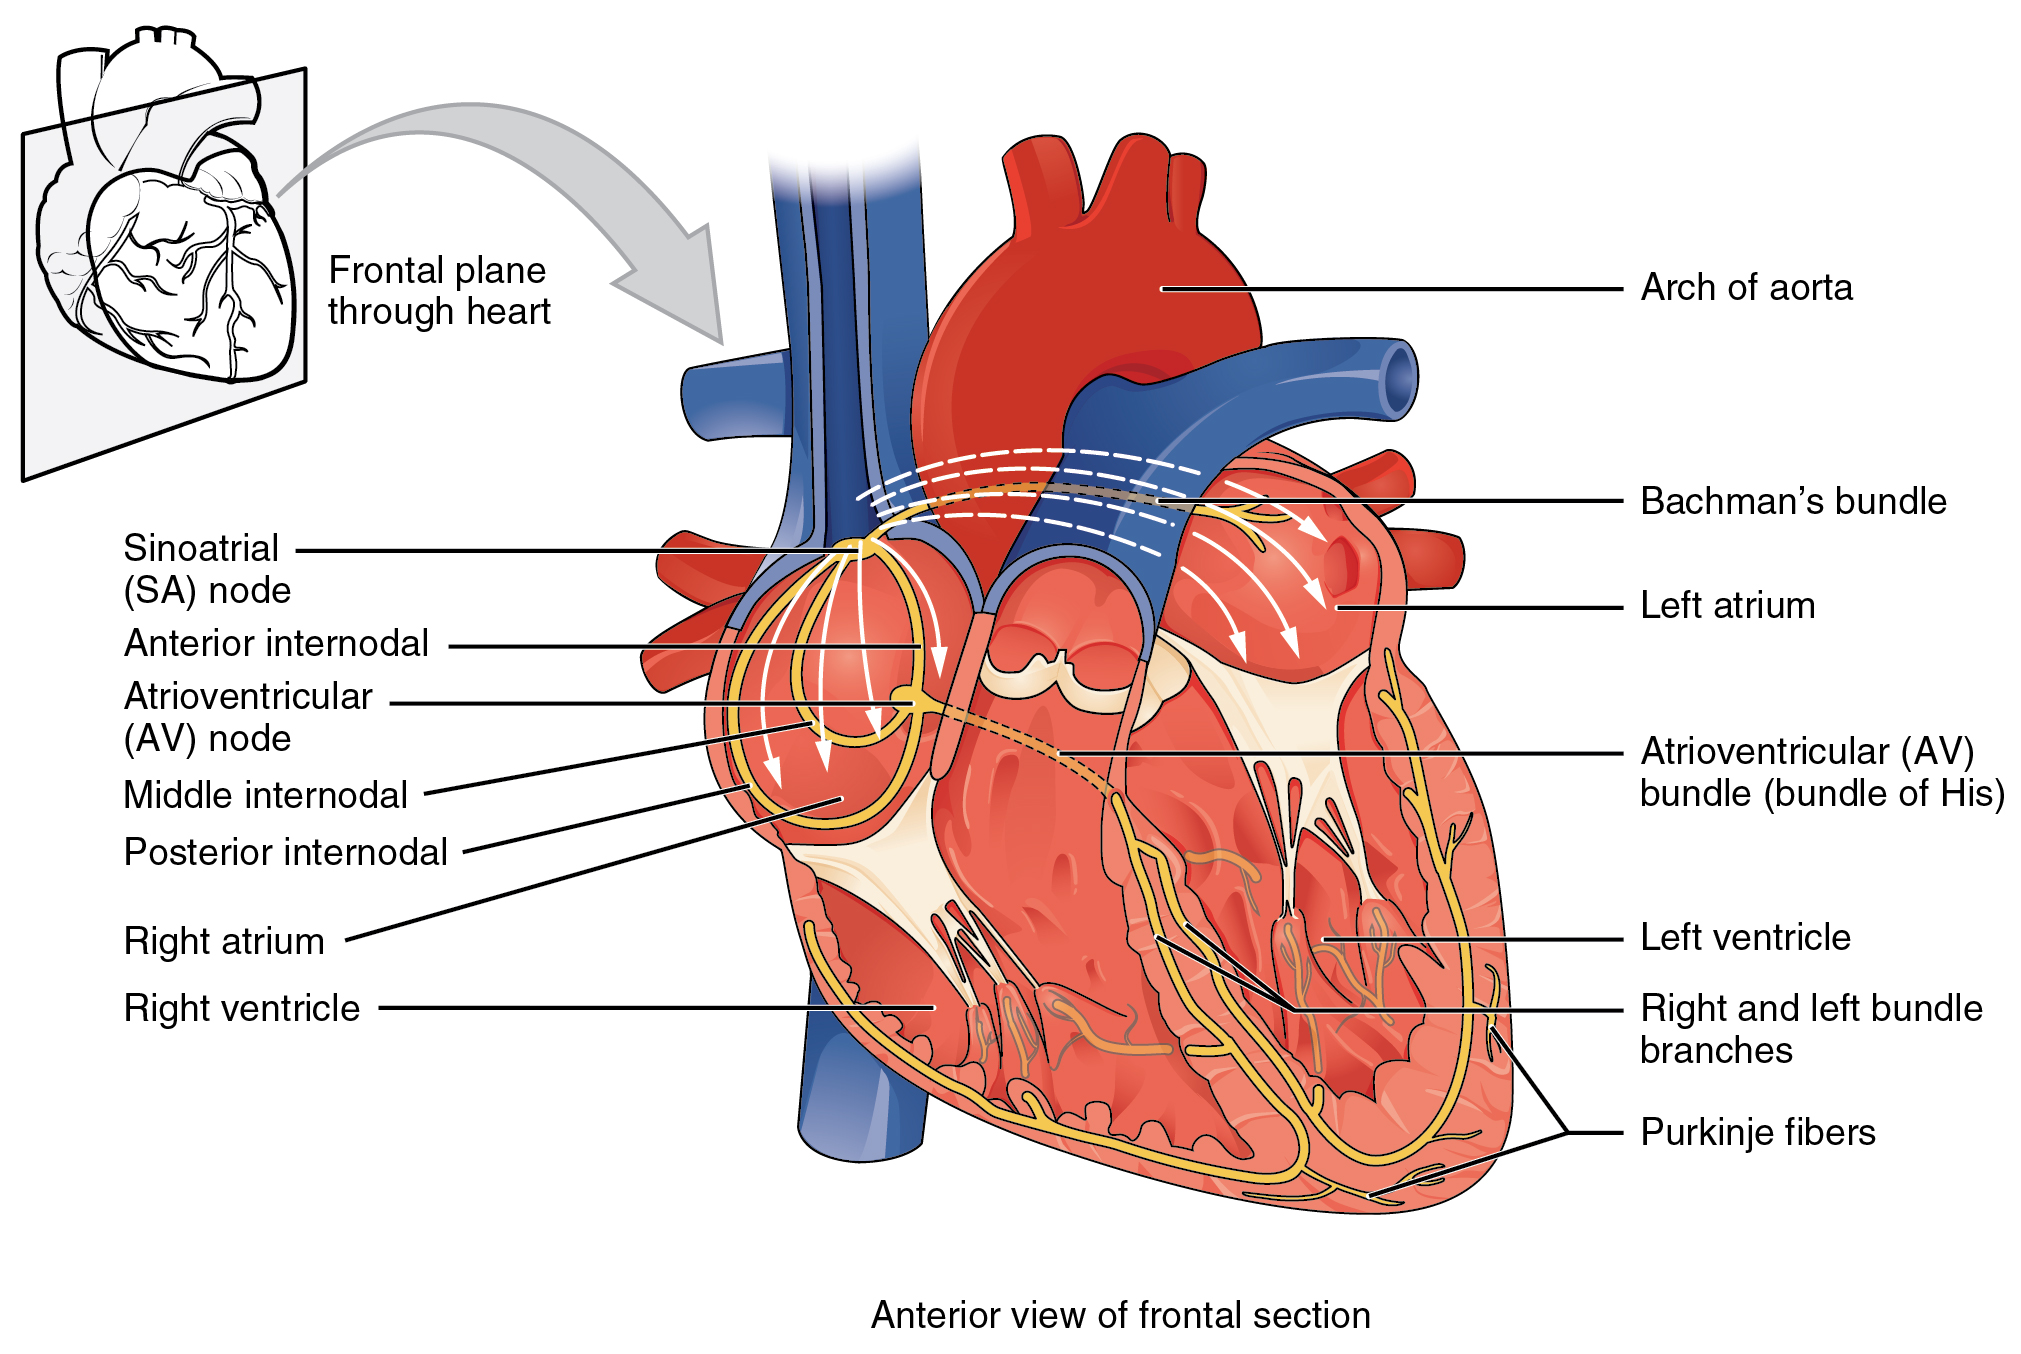 Anterior view of frontal section of the heart. Image description available.